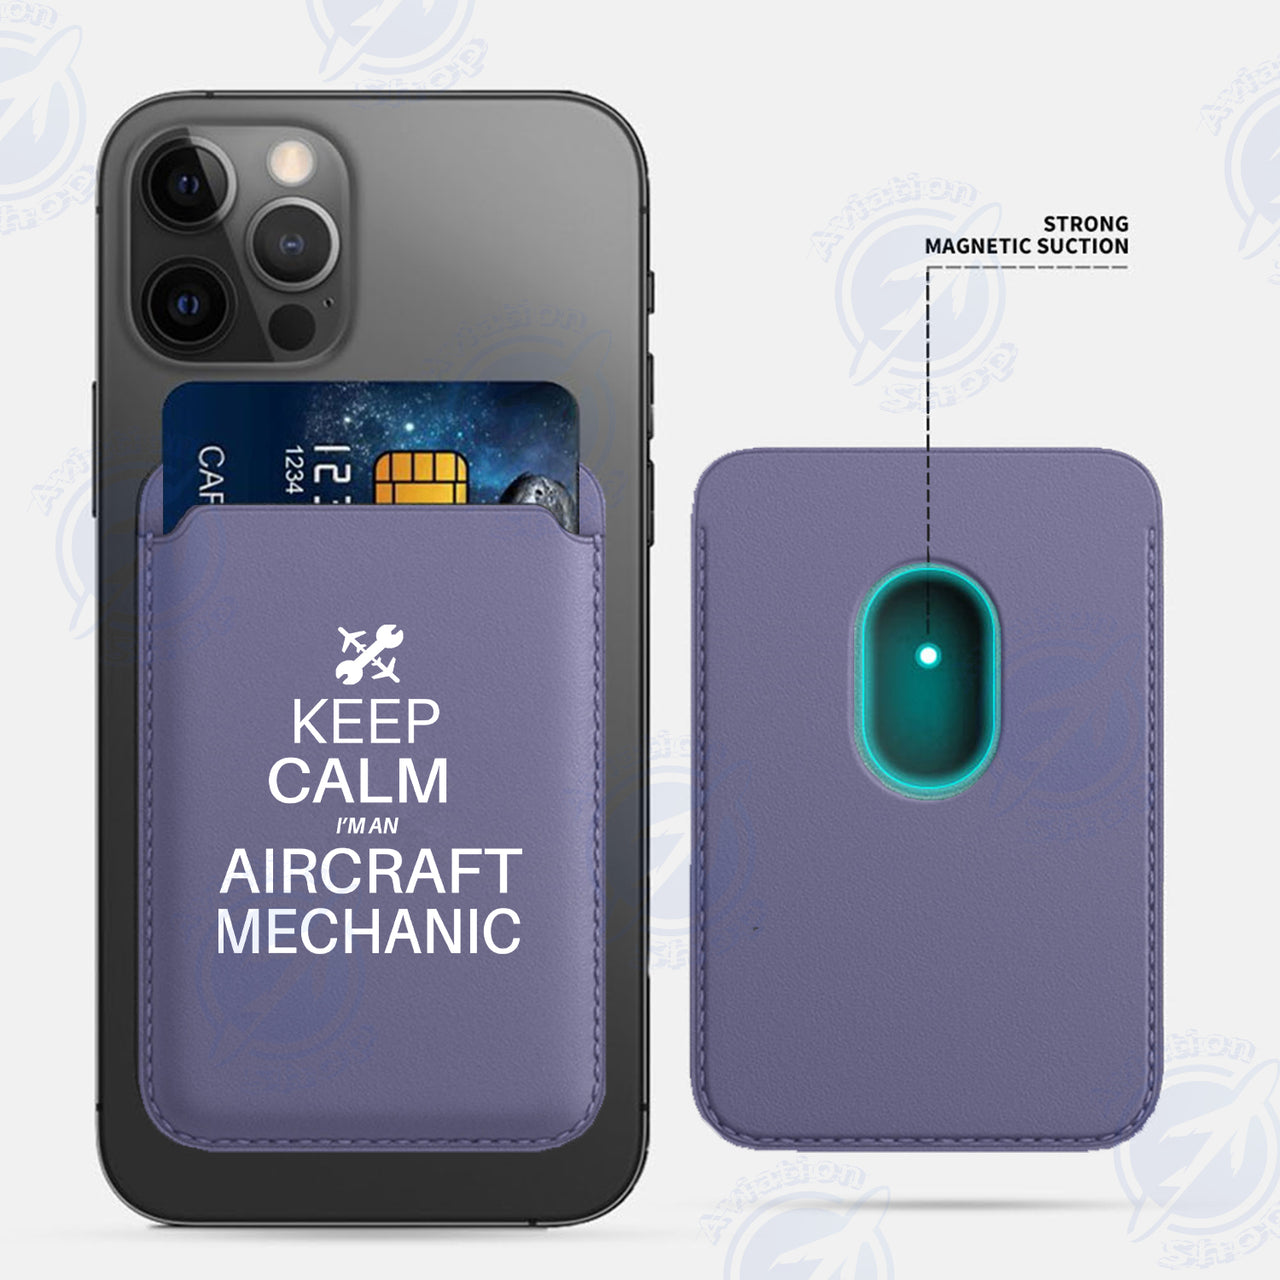 Aircraft Mechanic iPhone Cases Magnetic Card Wallet